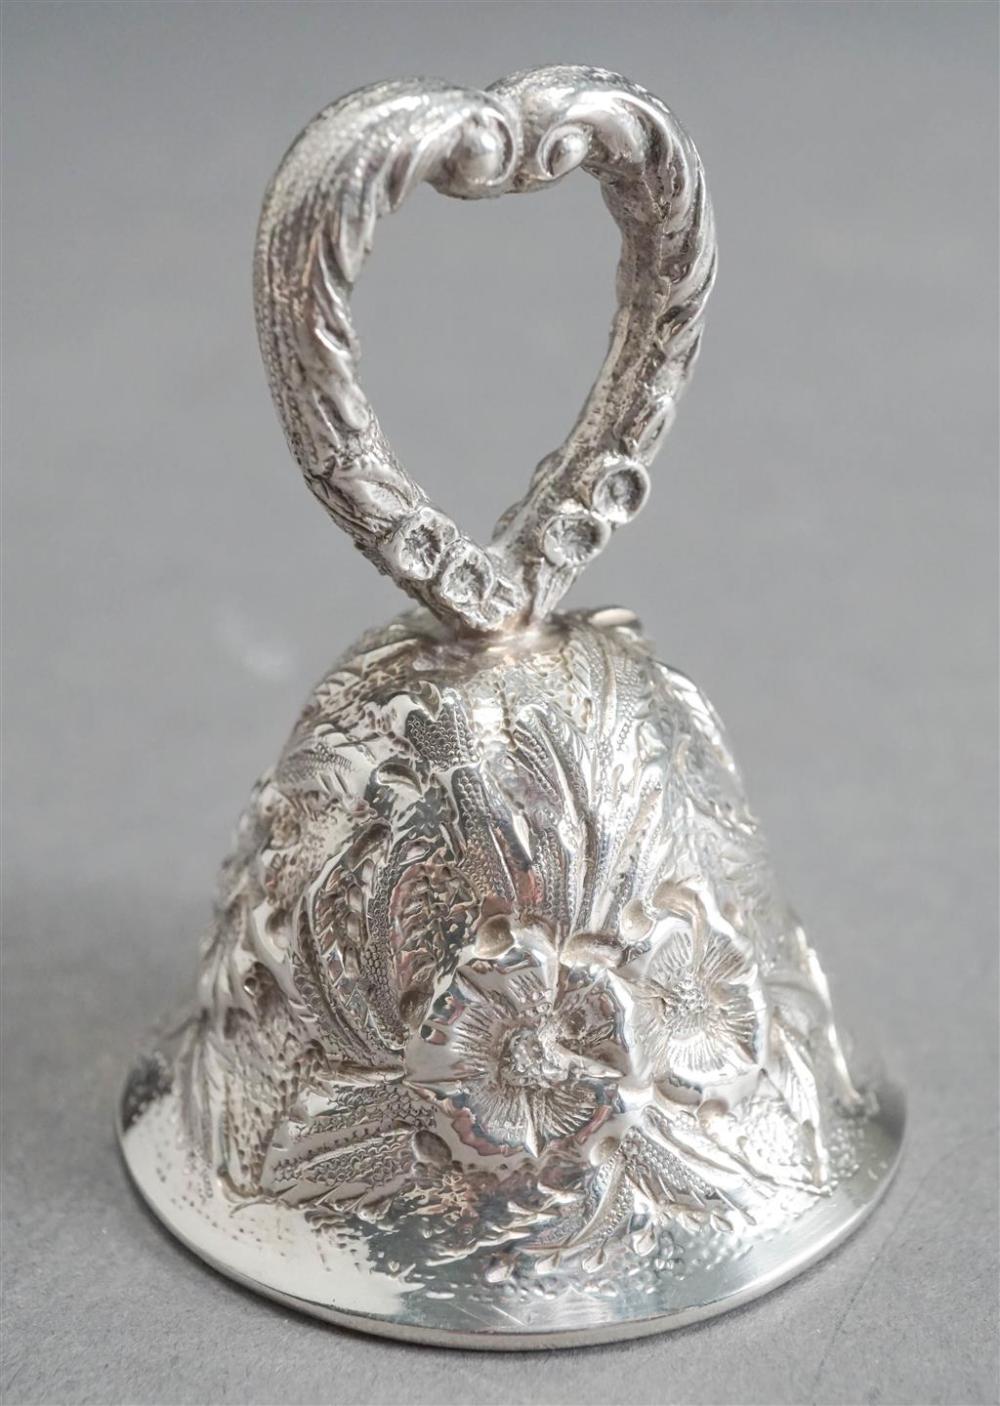 S KIRK SON REPOUSSE STERLING 3297fa